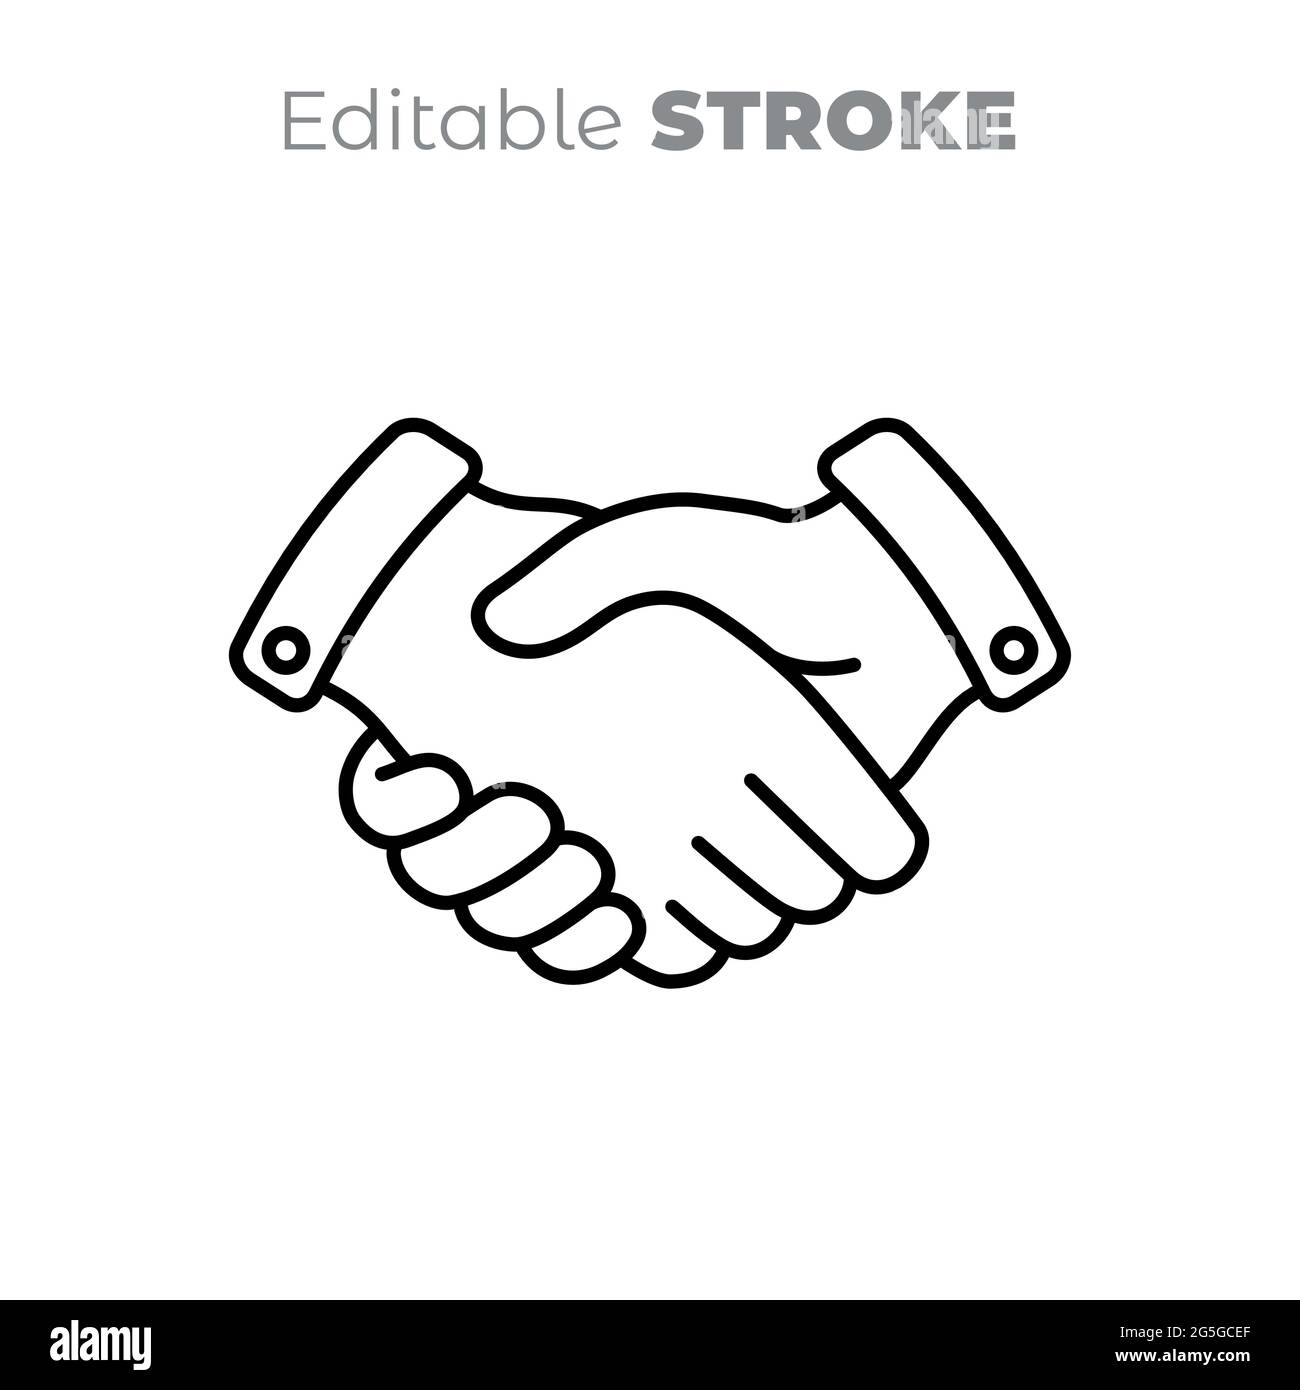 Vector handshake line art icon, sign. Business contract, agreement symbol. Editable line drawing, black and white illustration. Stock Vector